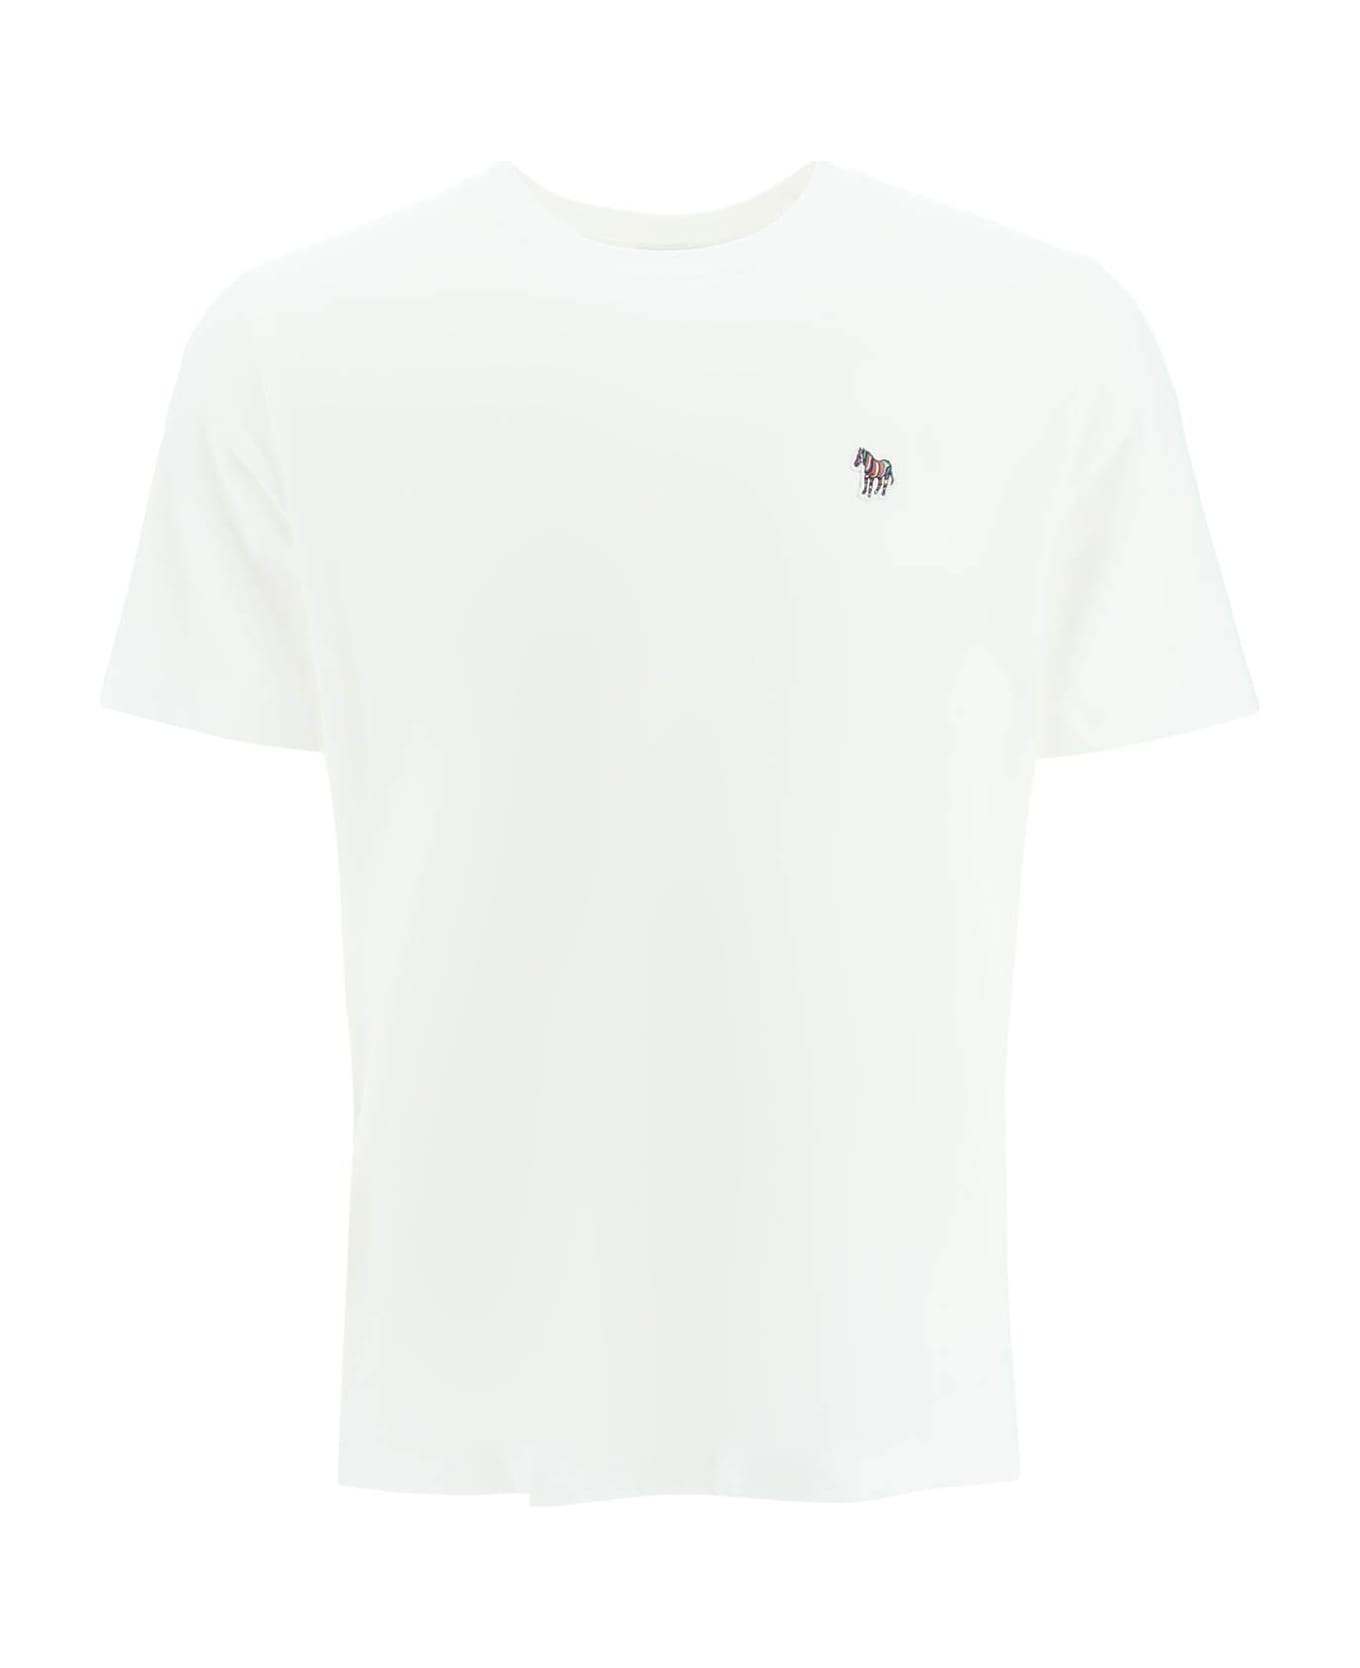 PS by Paul Smith Organic Cotton T-shirt - White